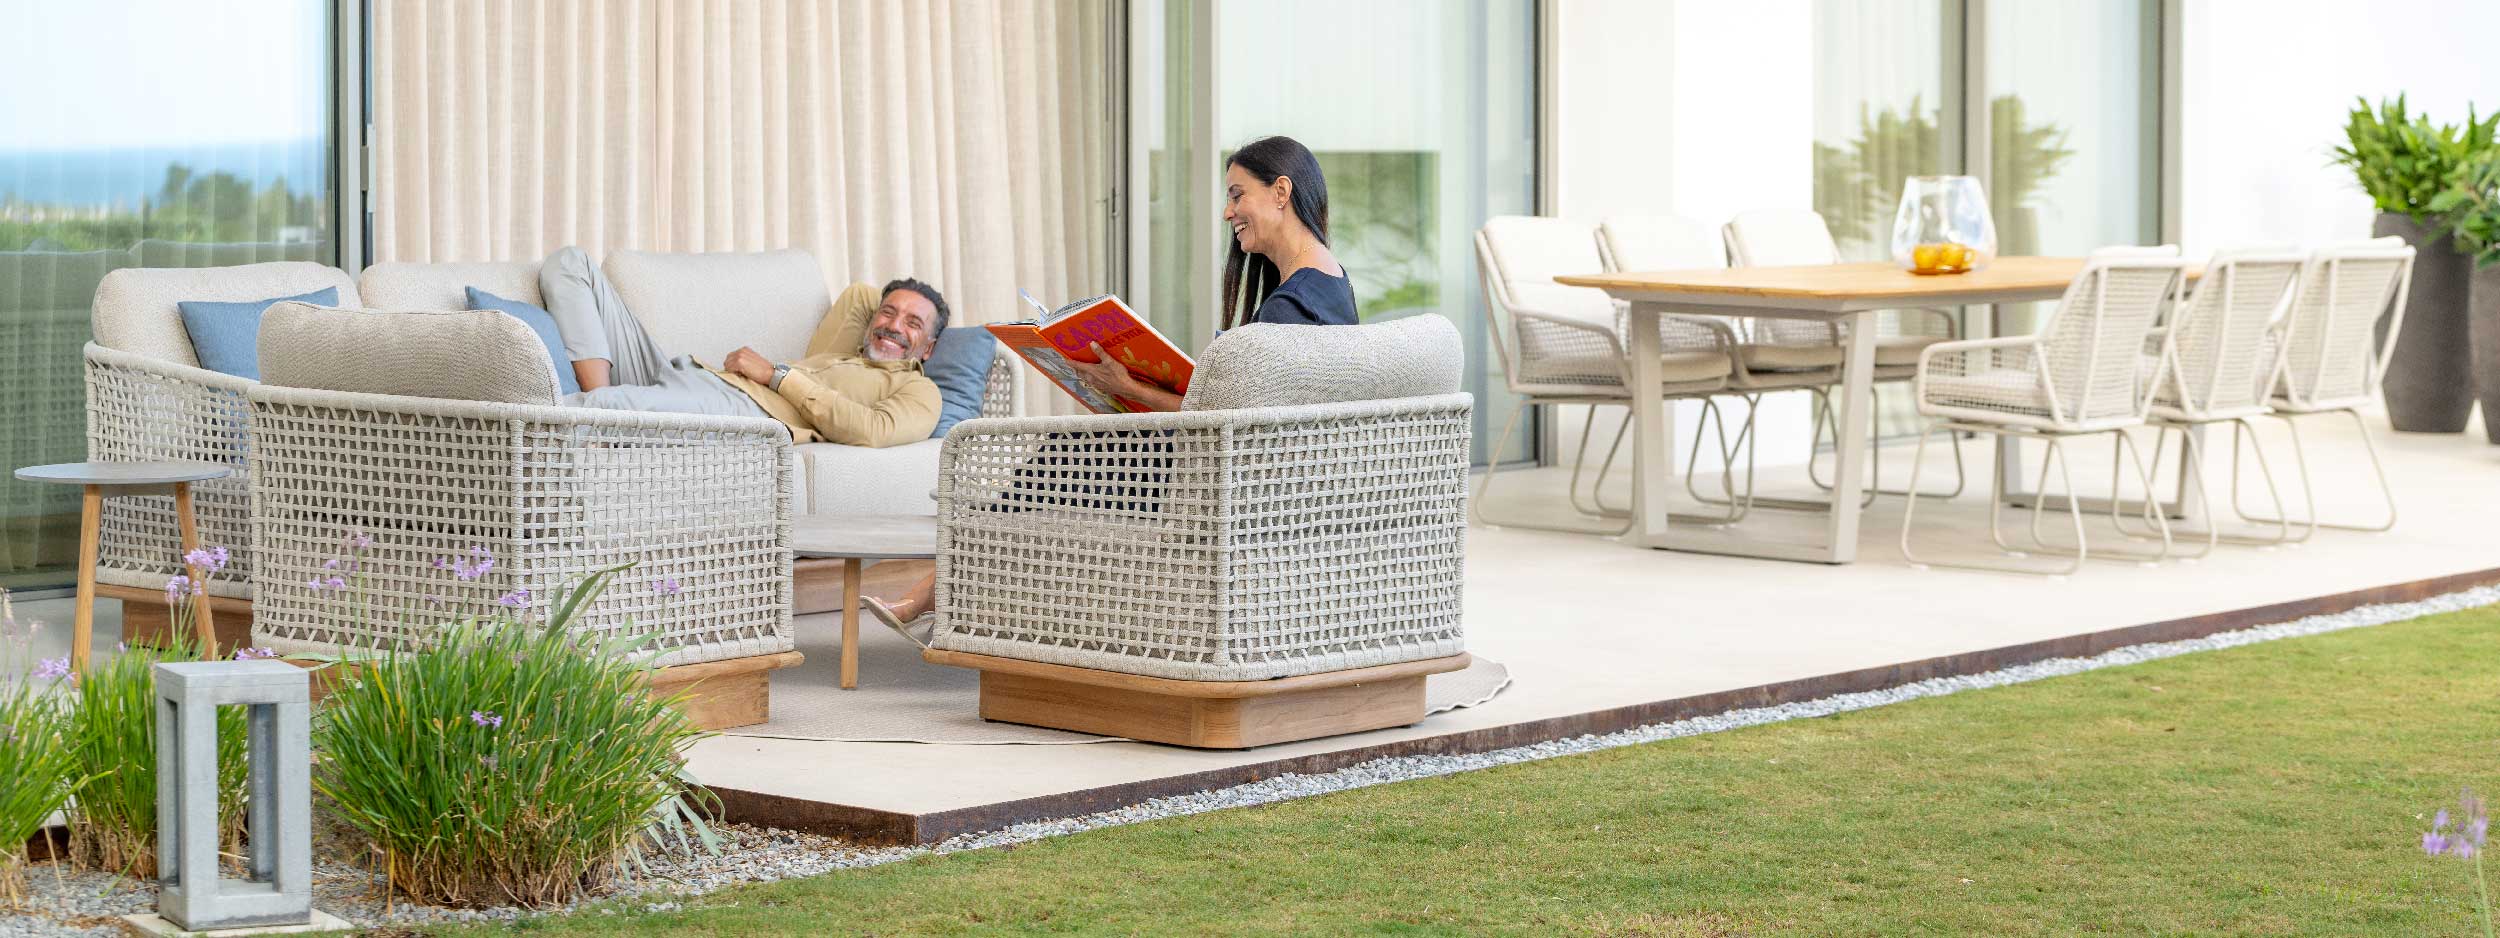 Image of couple lounging and enjoying each other's company on Acri contemporary outdoor lounge furniture, on swish terrace